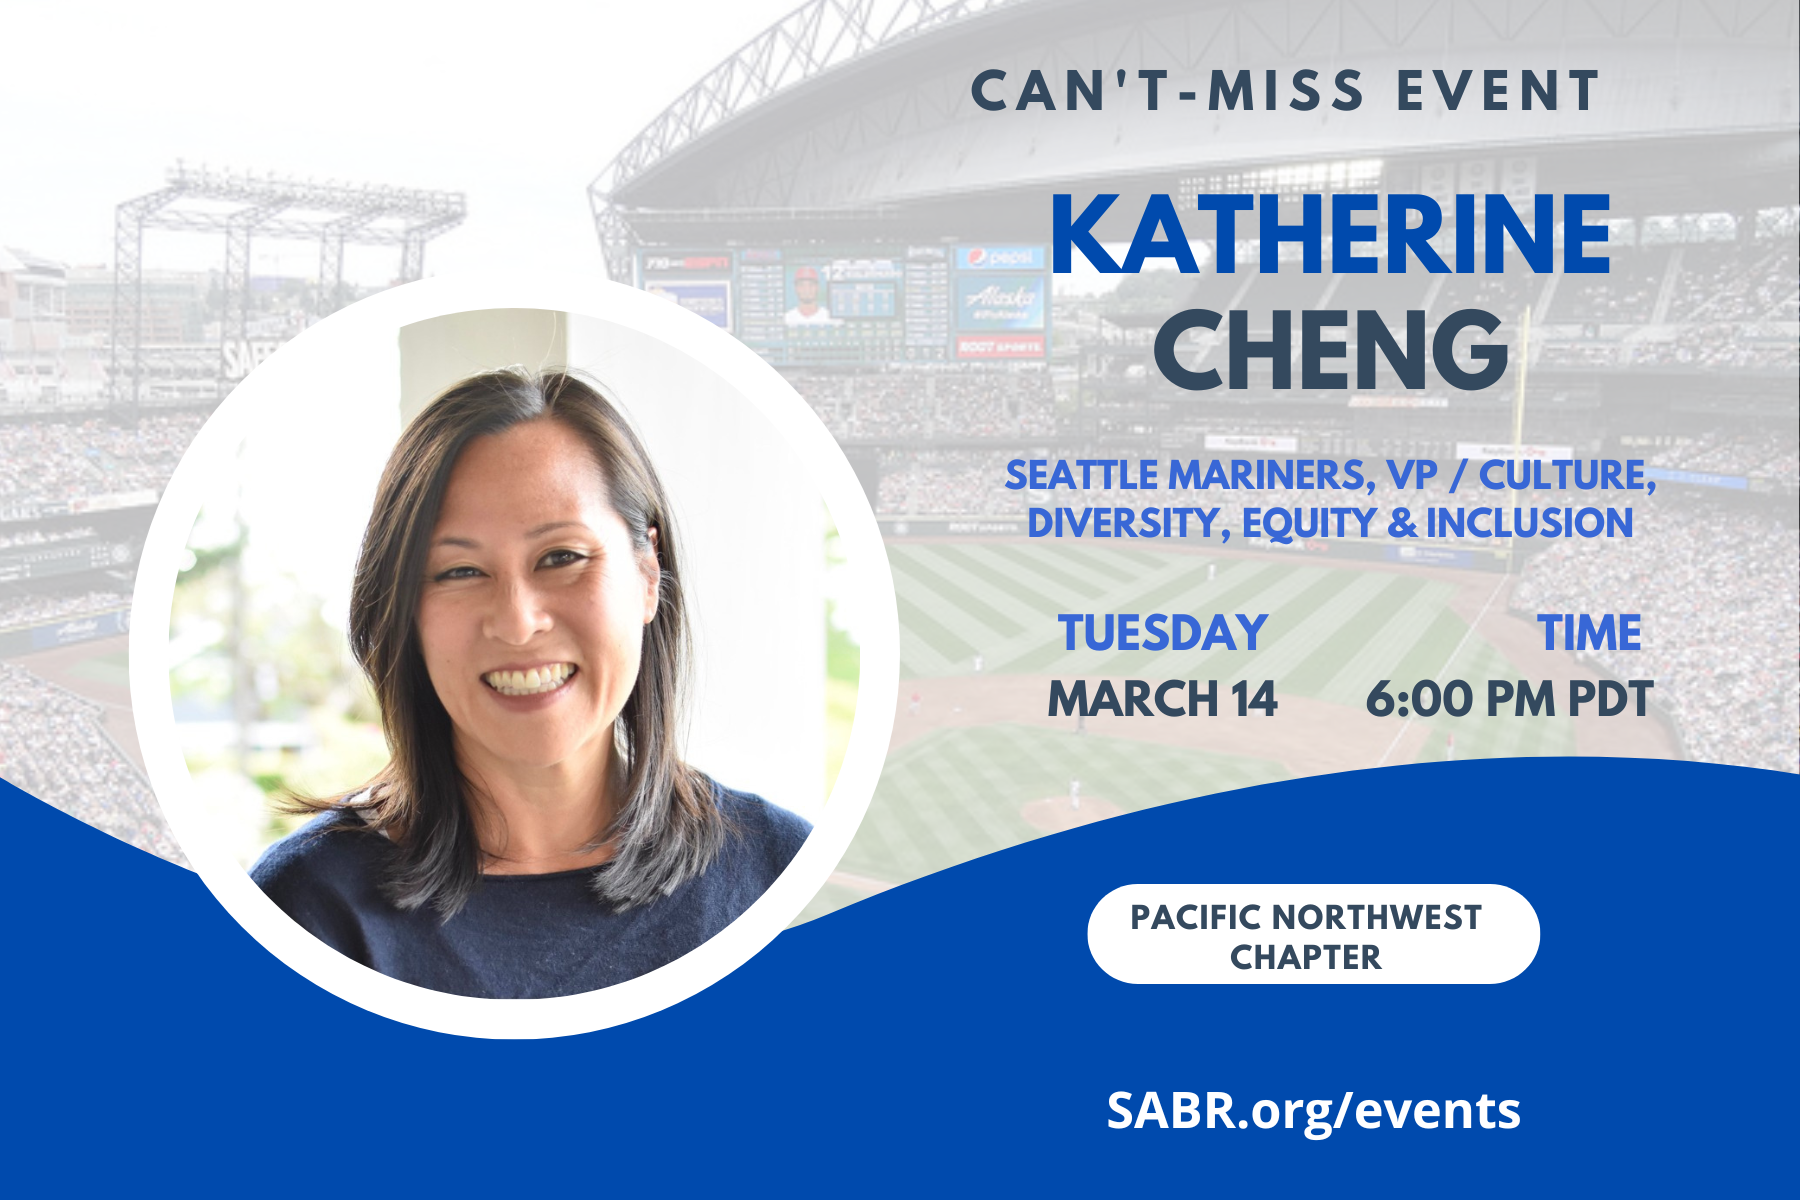 SABR's Northwest Chapter will hold a virtual Zoom meeting on Tuesday, March 14, 2023, at 6:00 PM Pacific Time. All baseball fans are invited to attend. The guest speaker will be Katherine Cheng, the VP of Culture and Diversity, Equity, and Inclusion for the Seattle Mariners. She will be speaking to our chapter about building an inclusive organizational culture at the big league level.